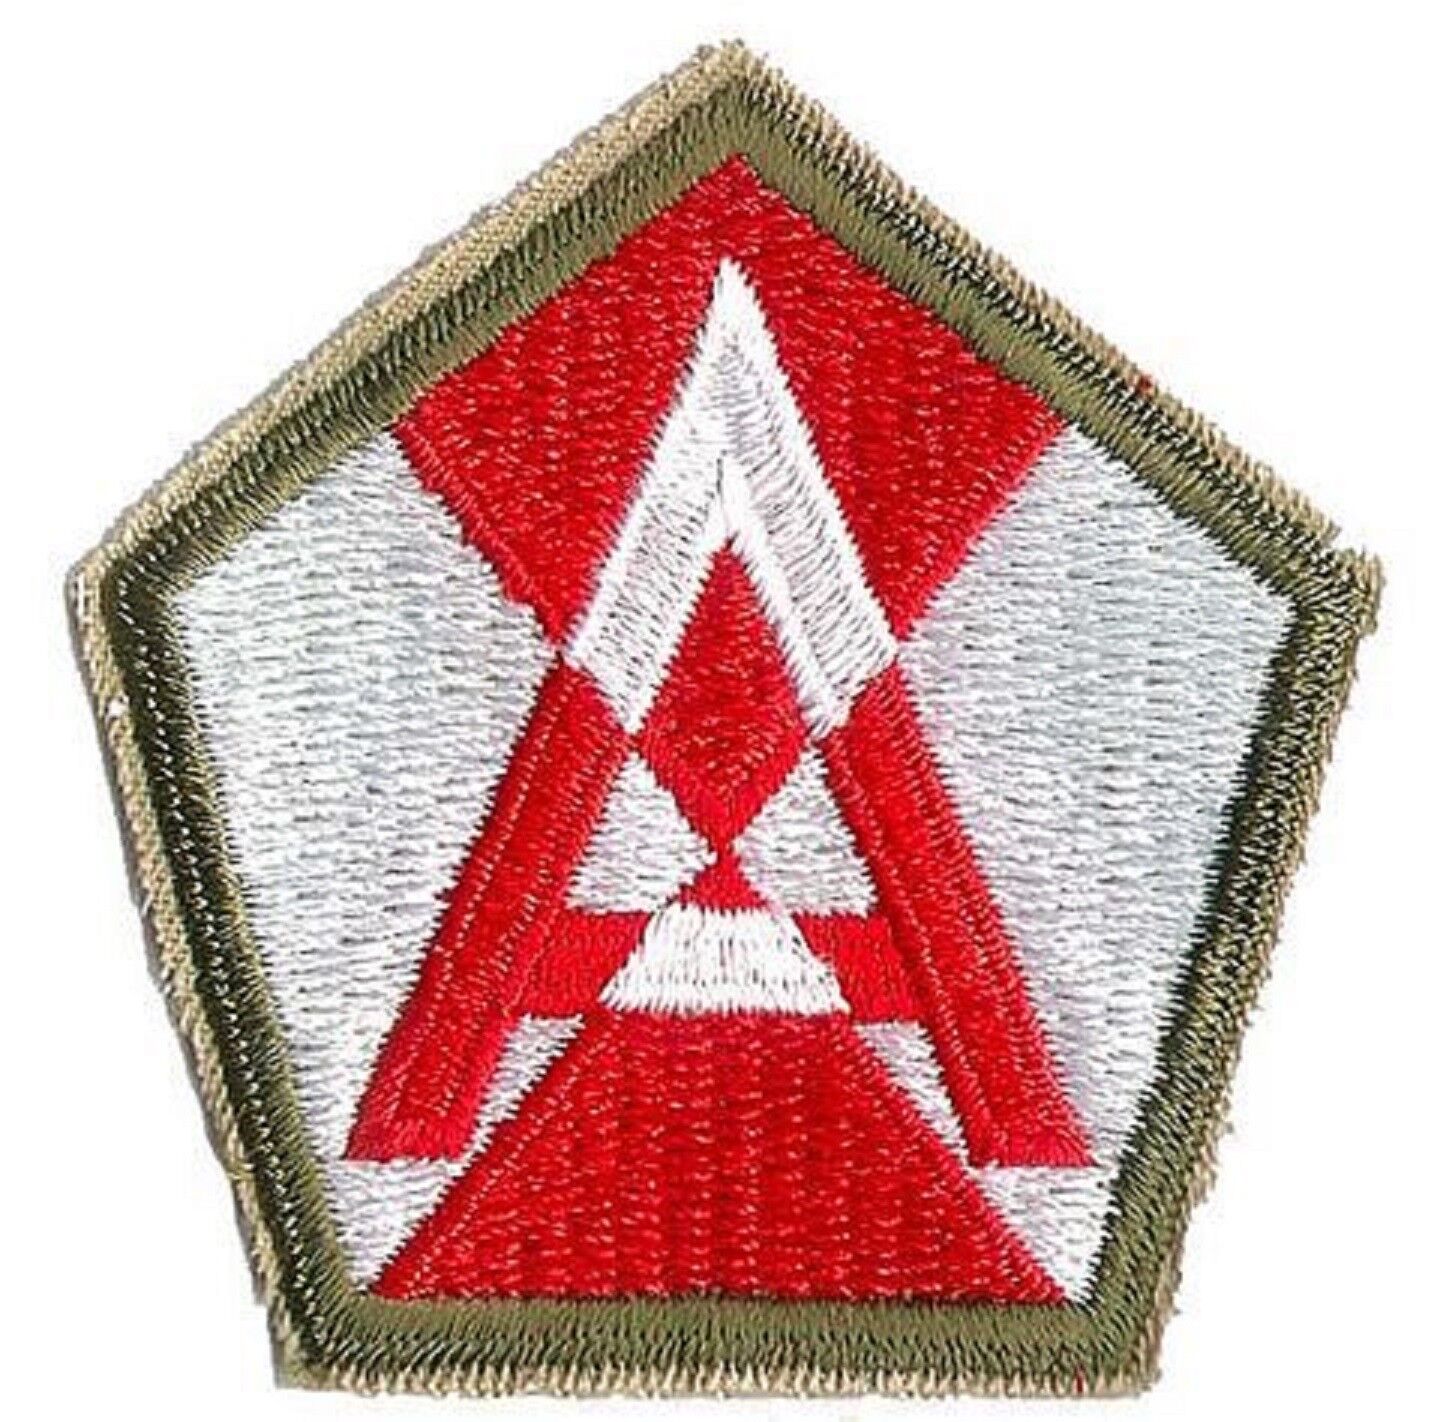 US ARMY WWII 15TH ARMY PATCH (REPRODUCTION) 